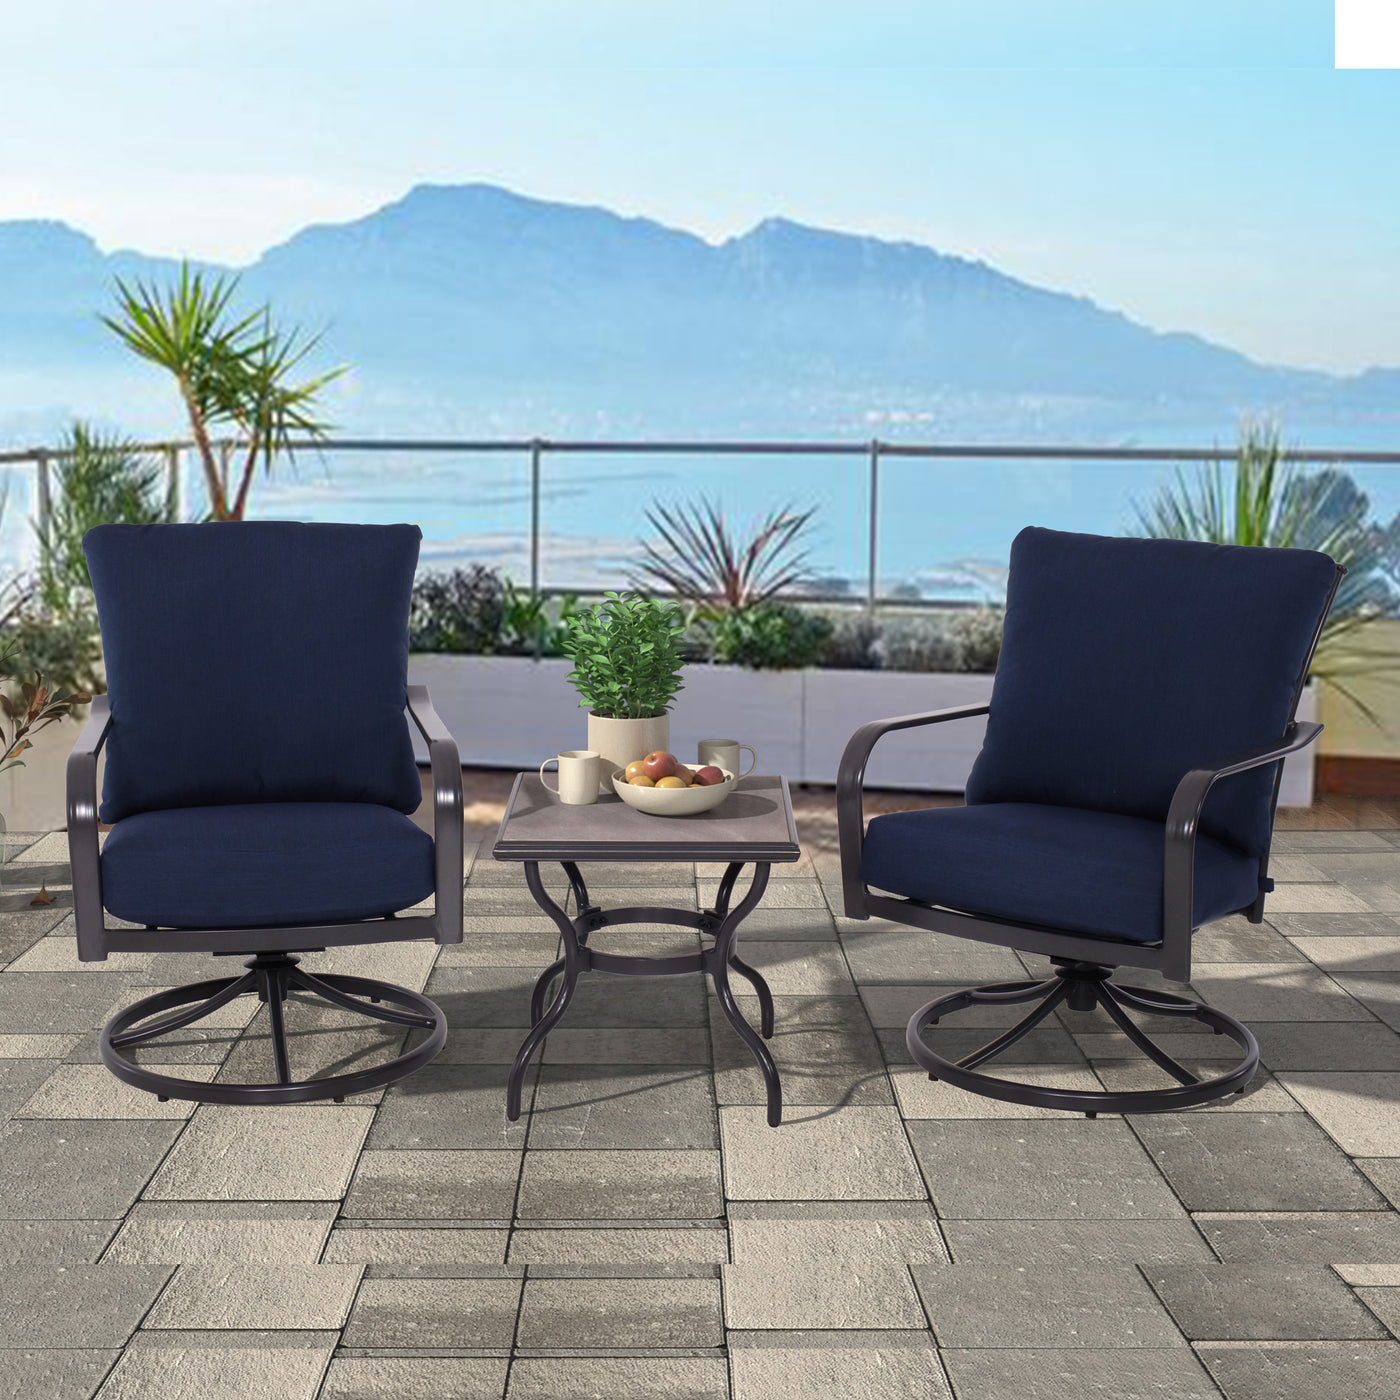 Aluminum 3-Piece Outdoor Conversation Set, All-Weather Patio Furniture Set with 2 Cushioned Swivel Rocking Chairs and Tile Top Side Table for Porch Backyard Garden Deck